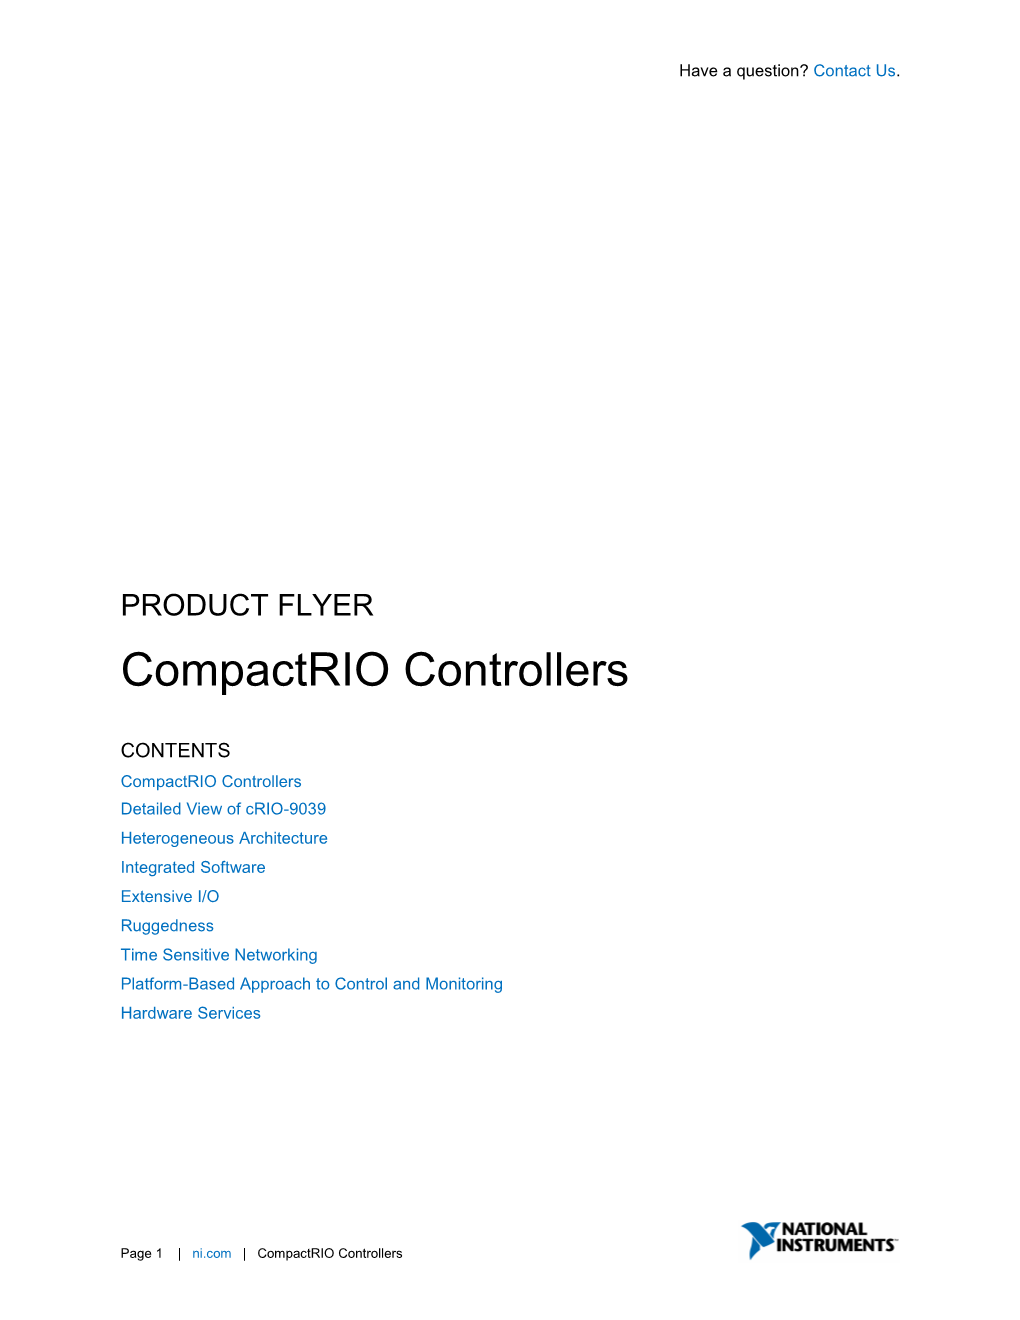 Compactrio Controllers Product Flyer